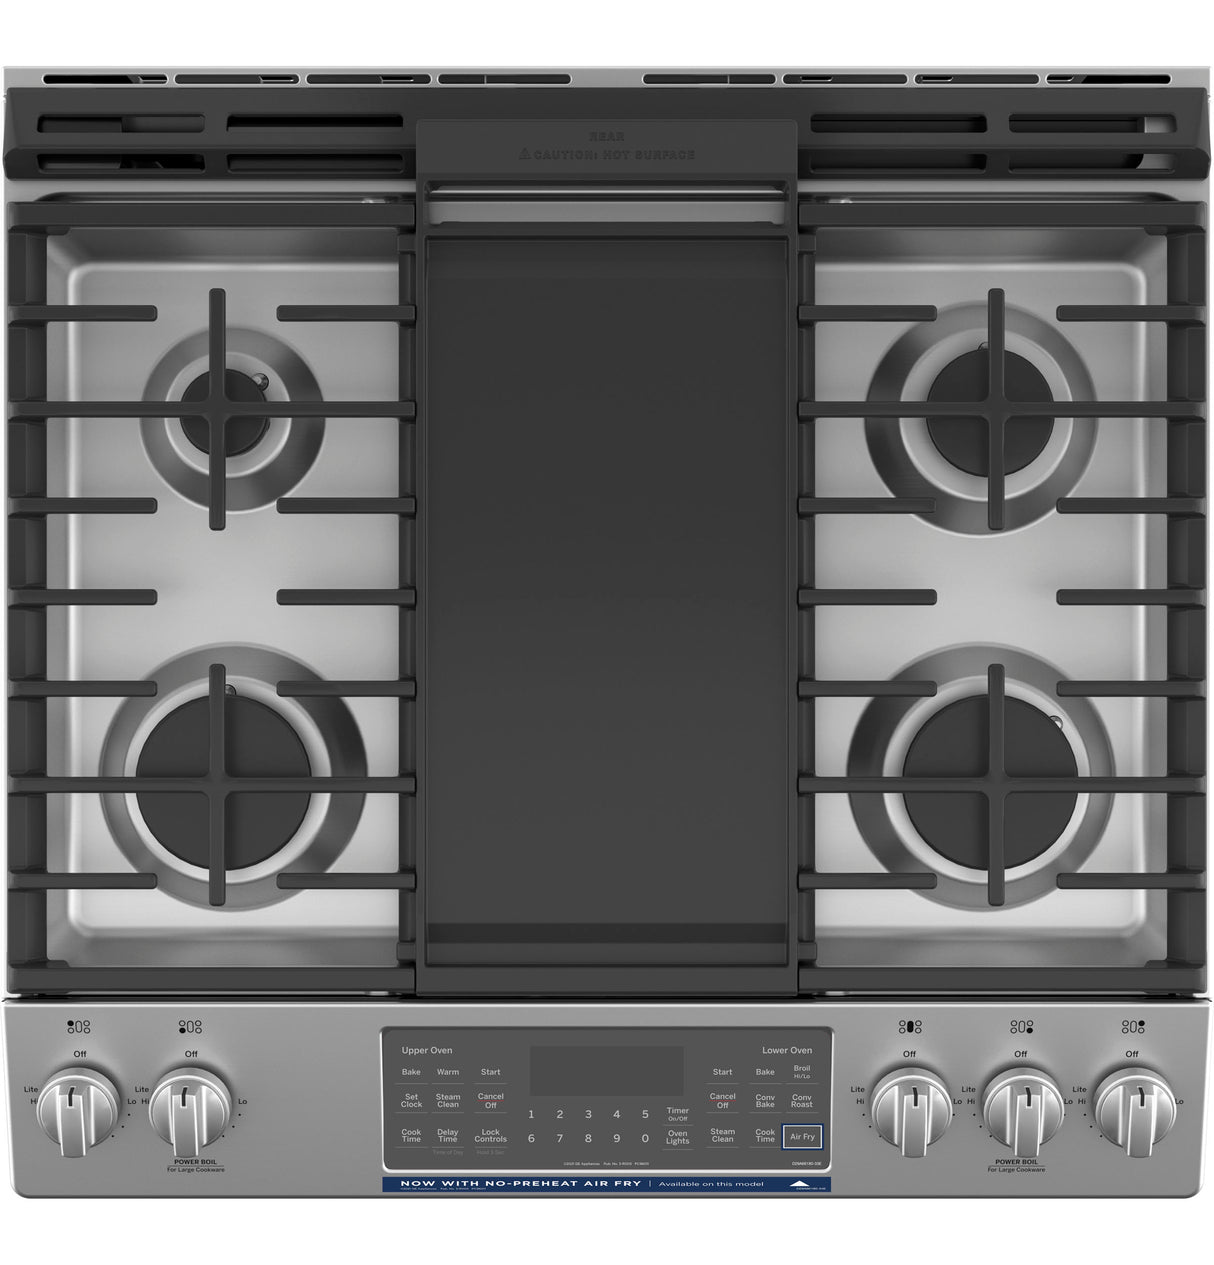 GE(R) 30" Slide-In Front Control Gas Double Oven Range - (JGSS86SPSS)